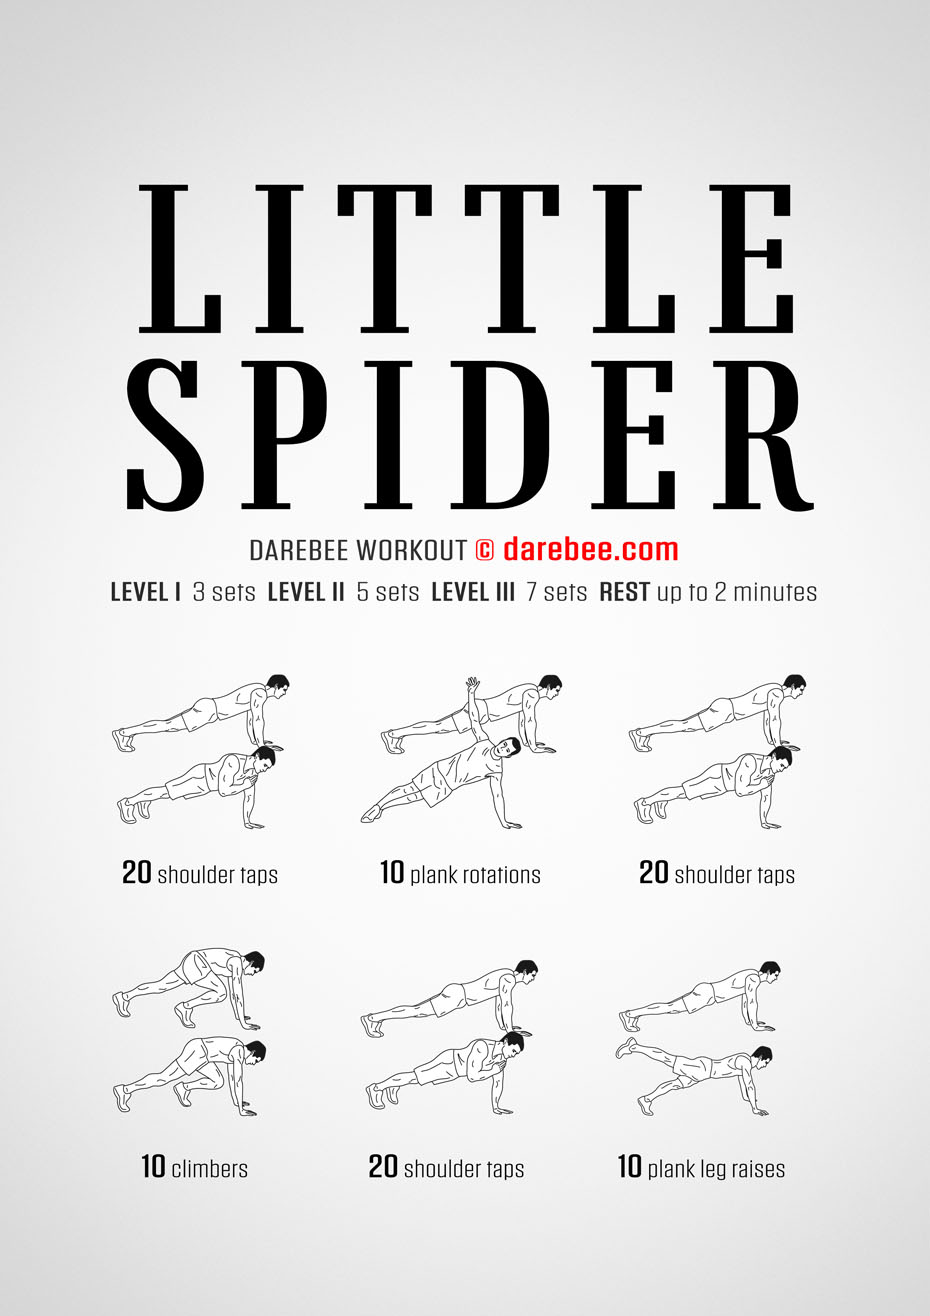 Little Spider is a total body Darebee home-fitness strength workout that will help you increase the level of control you have over your body.